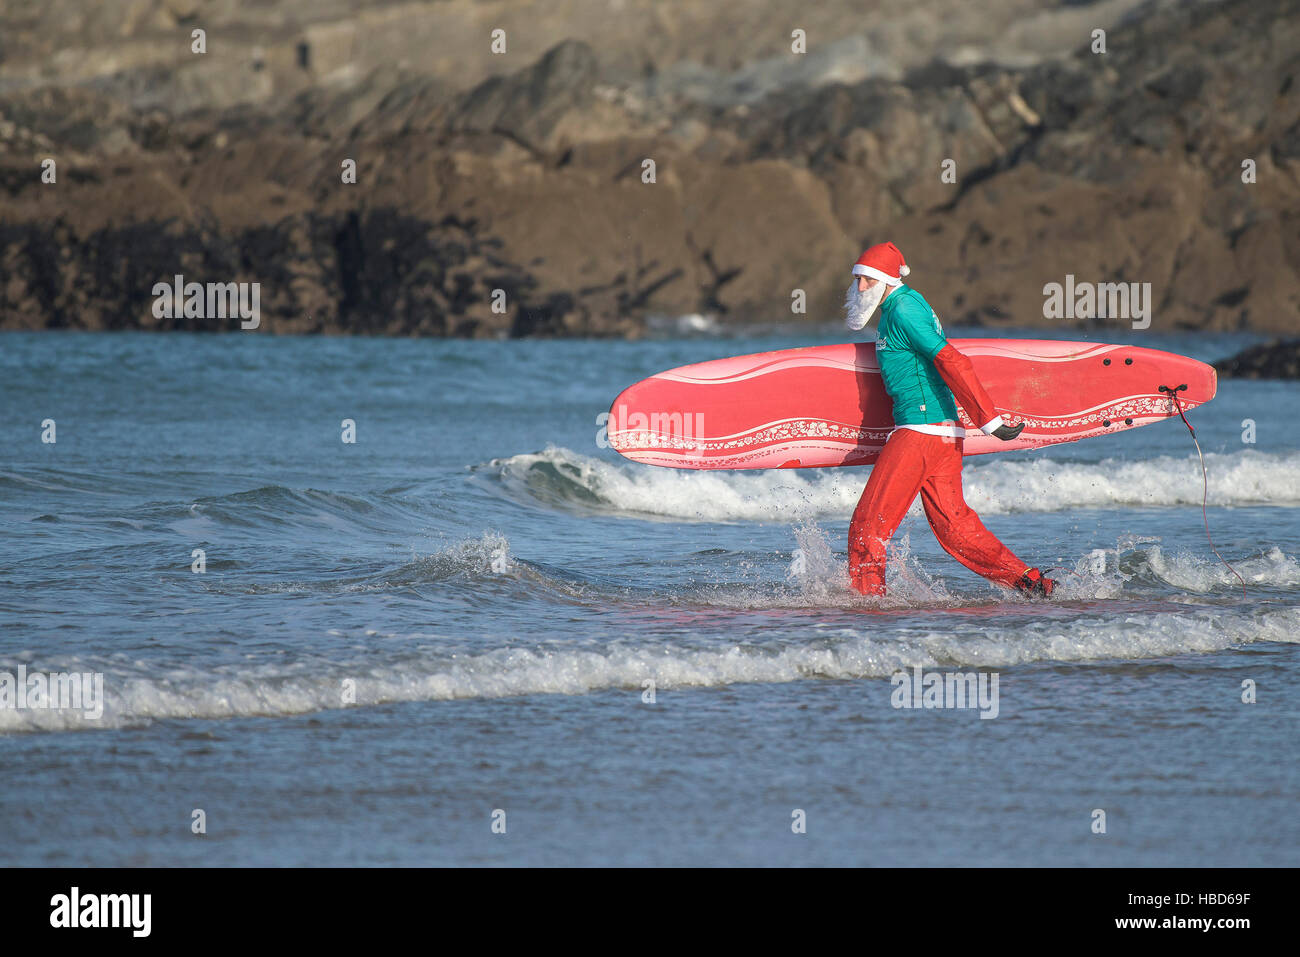 A surfing Santa running into the sea during the annual fund-raising Santa Surfing competition on a very chilly Fistral Beach in Newquay, Cornwall. Stock Photo